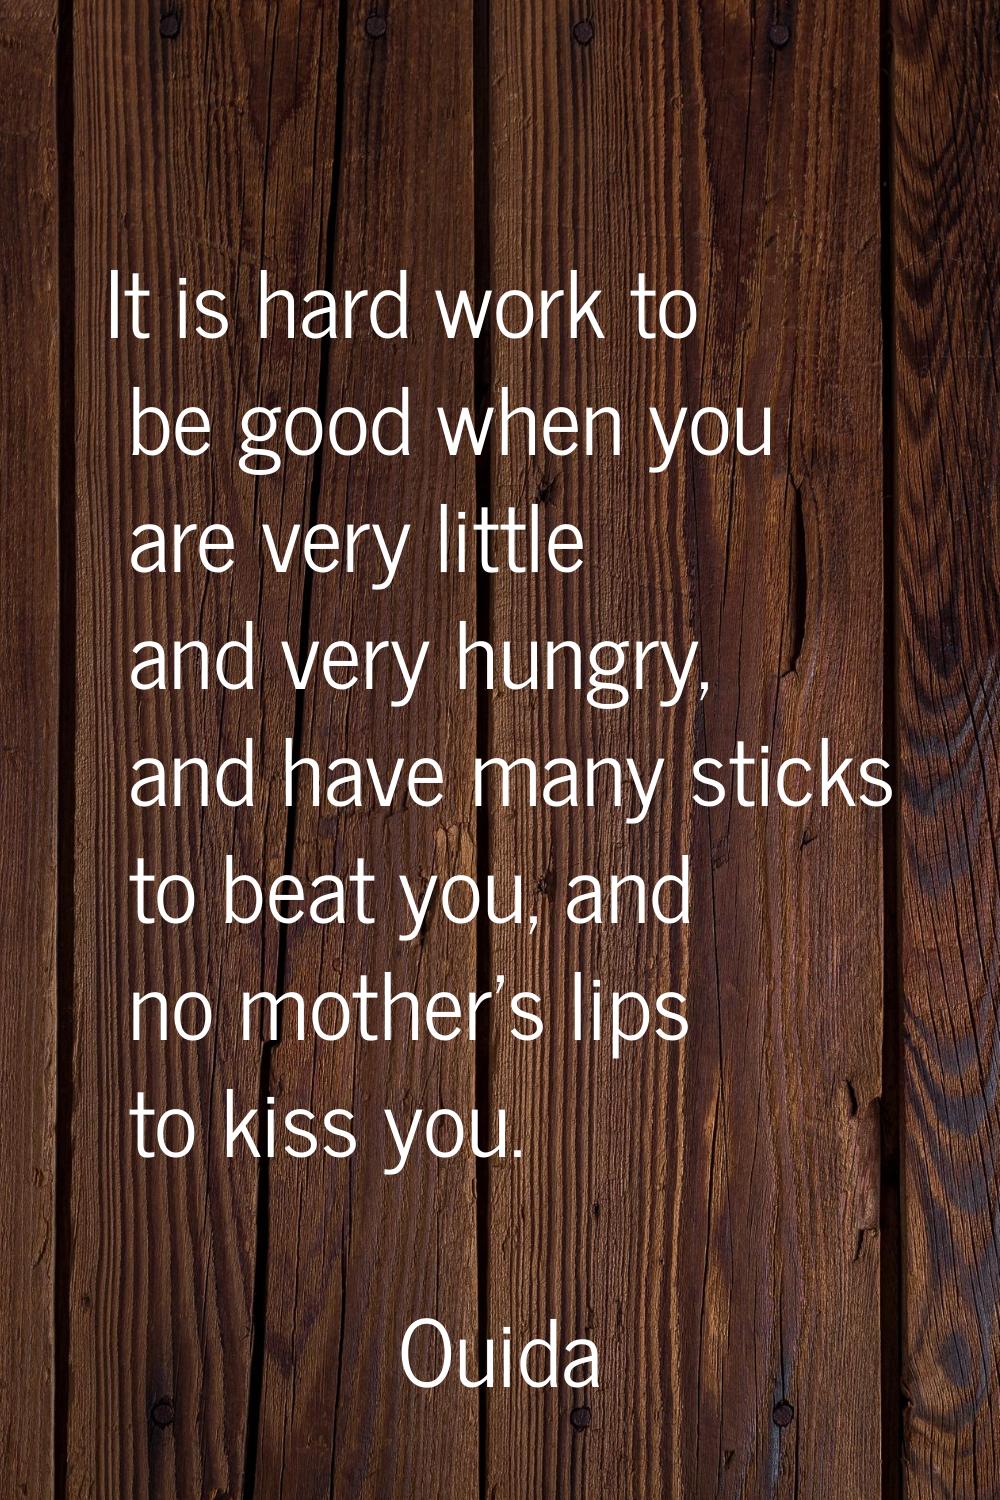 It is hard work to be good when you are very little and very hungry, and have many sticks to beat y